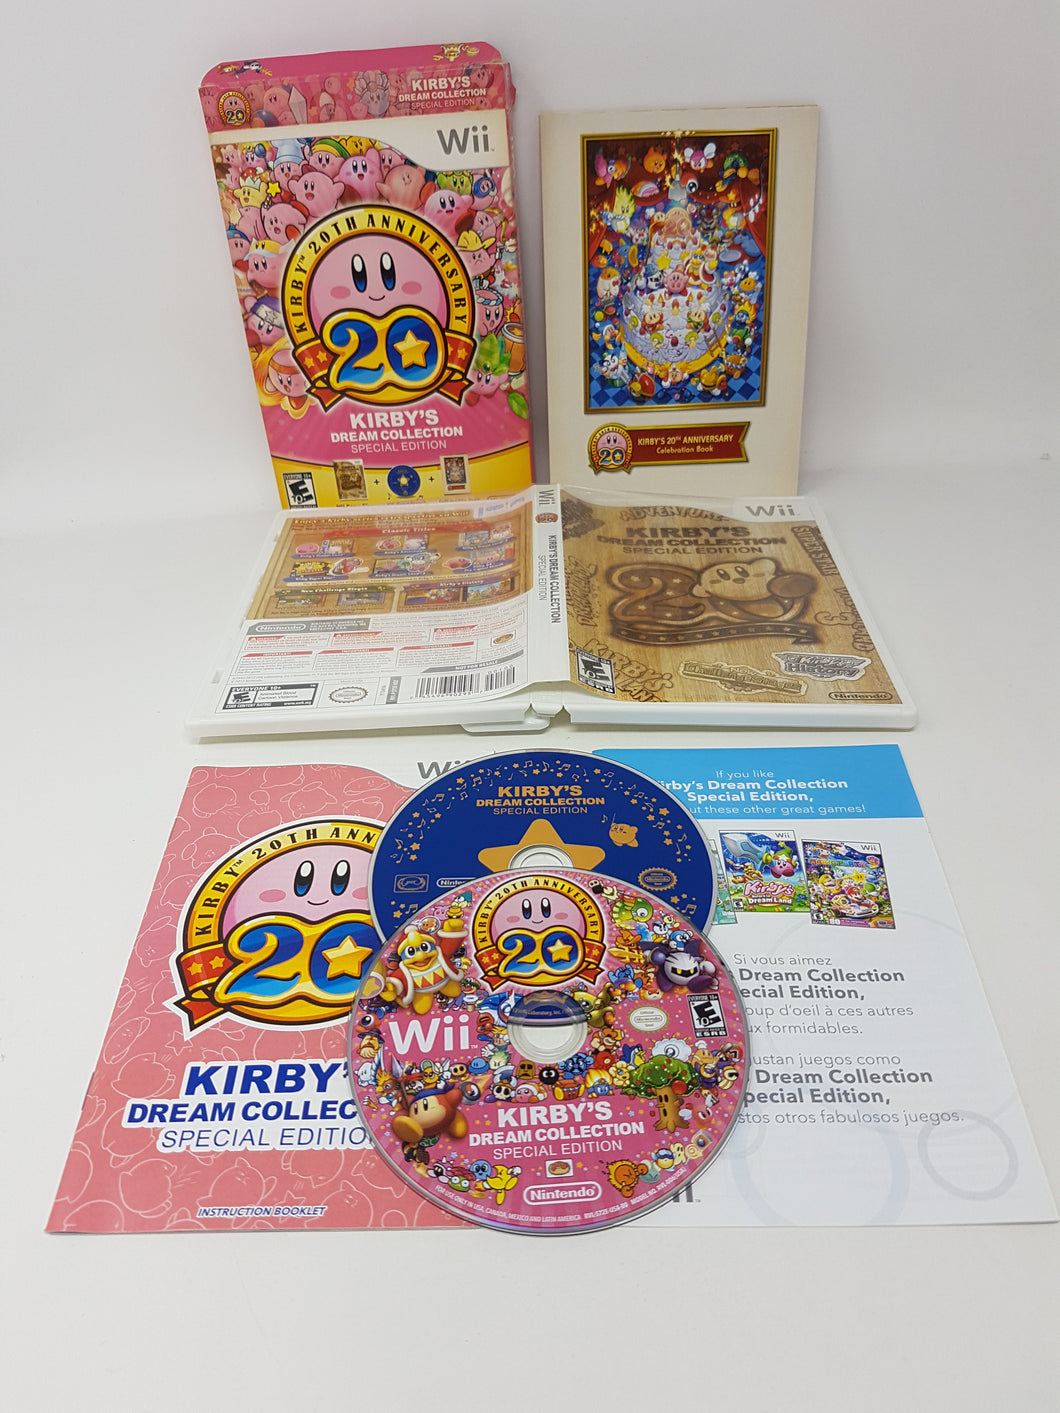 Kirby's Dream Collector's Special Edition - Nintendo Wii, Nintendo Wii